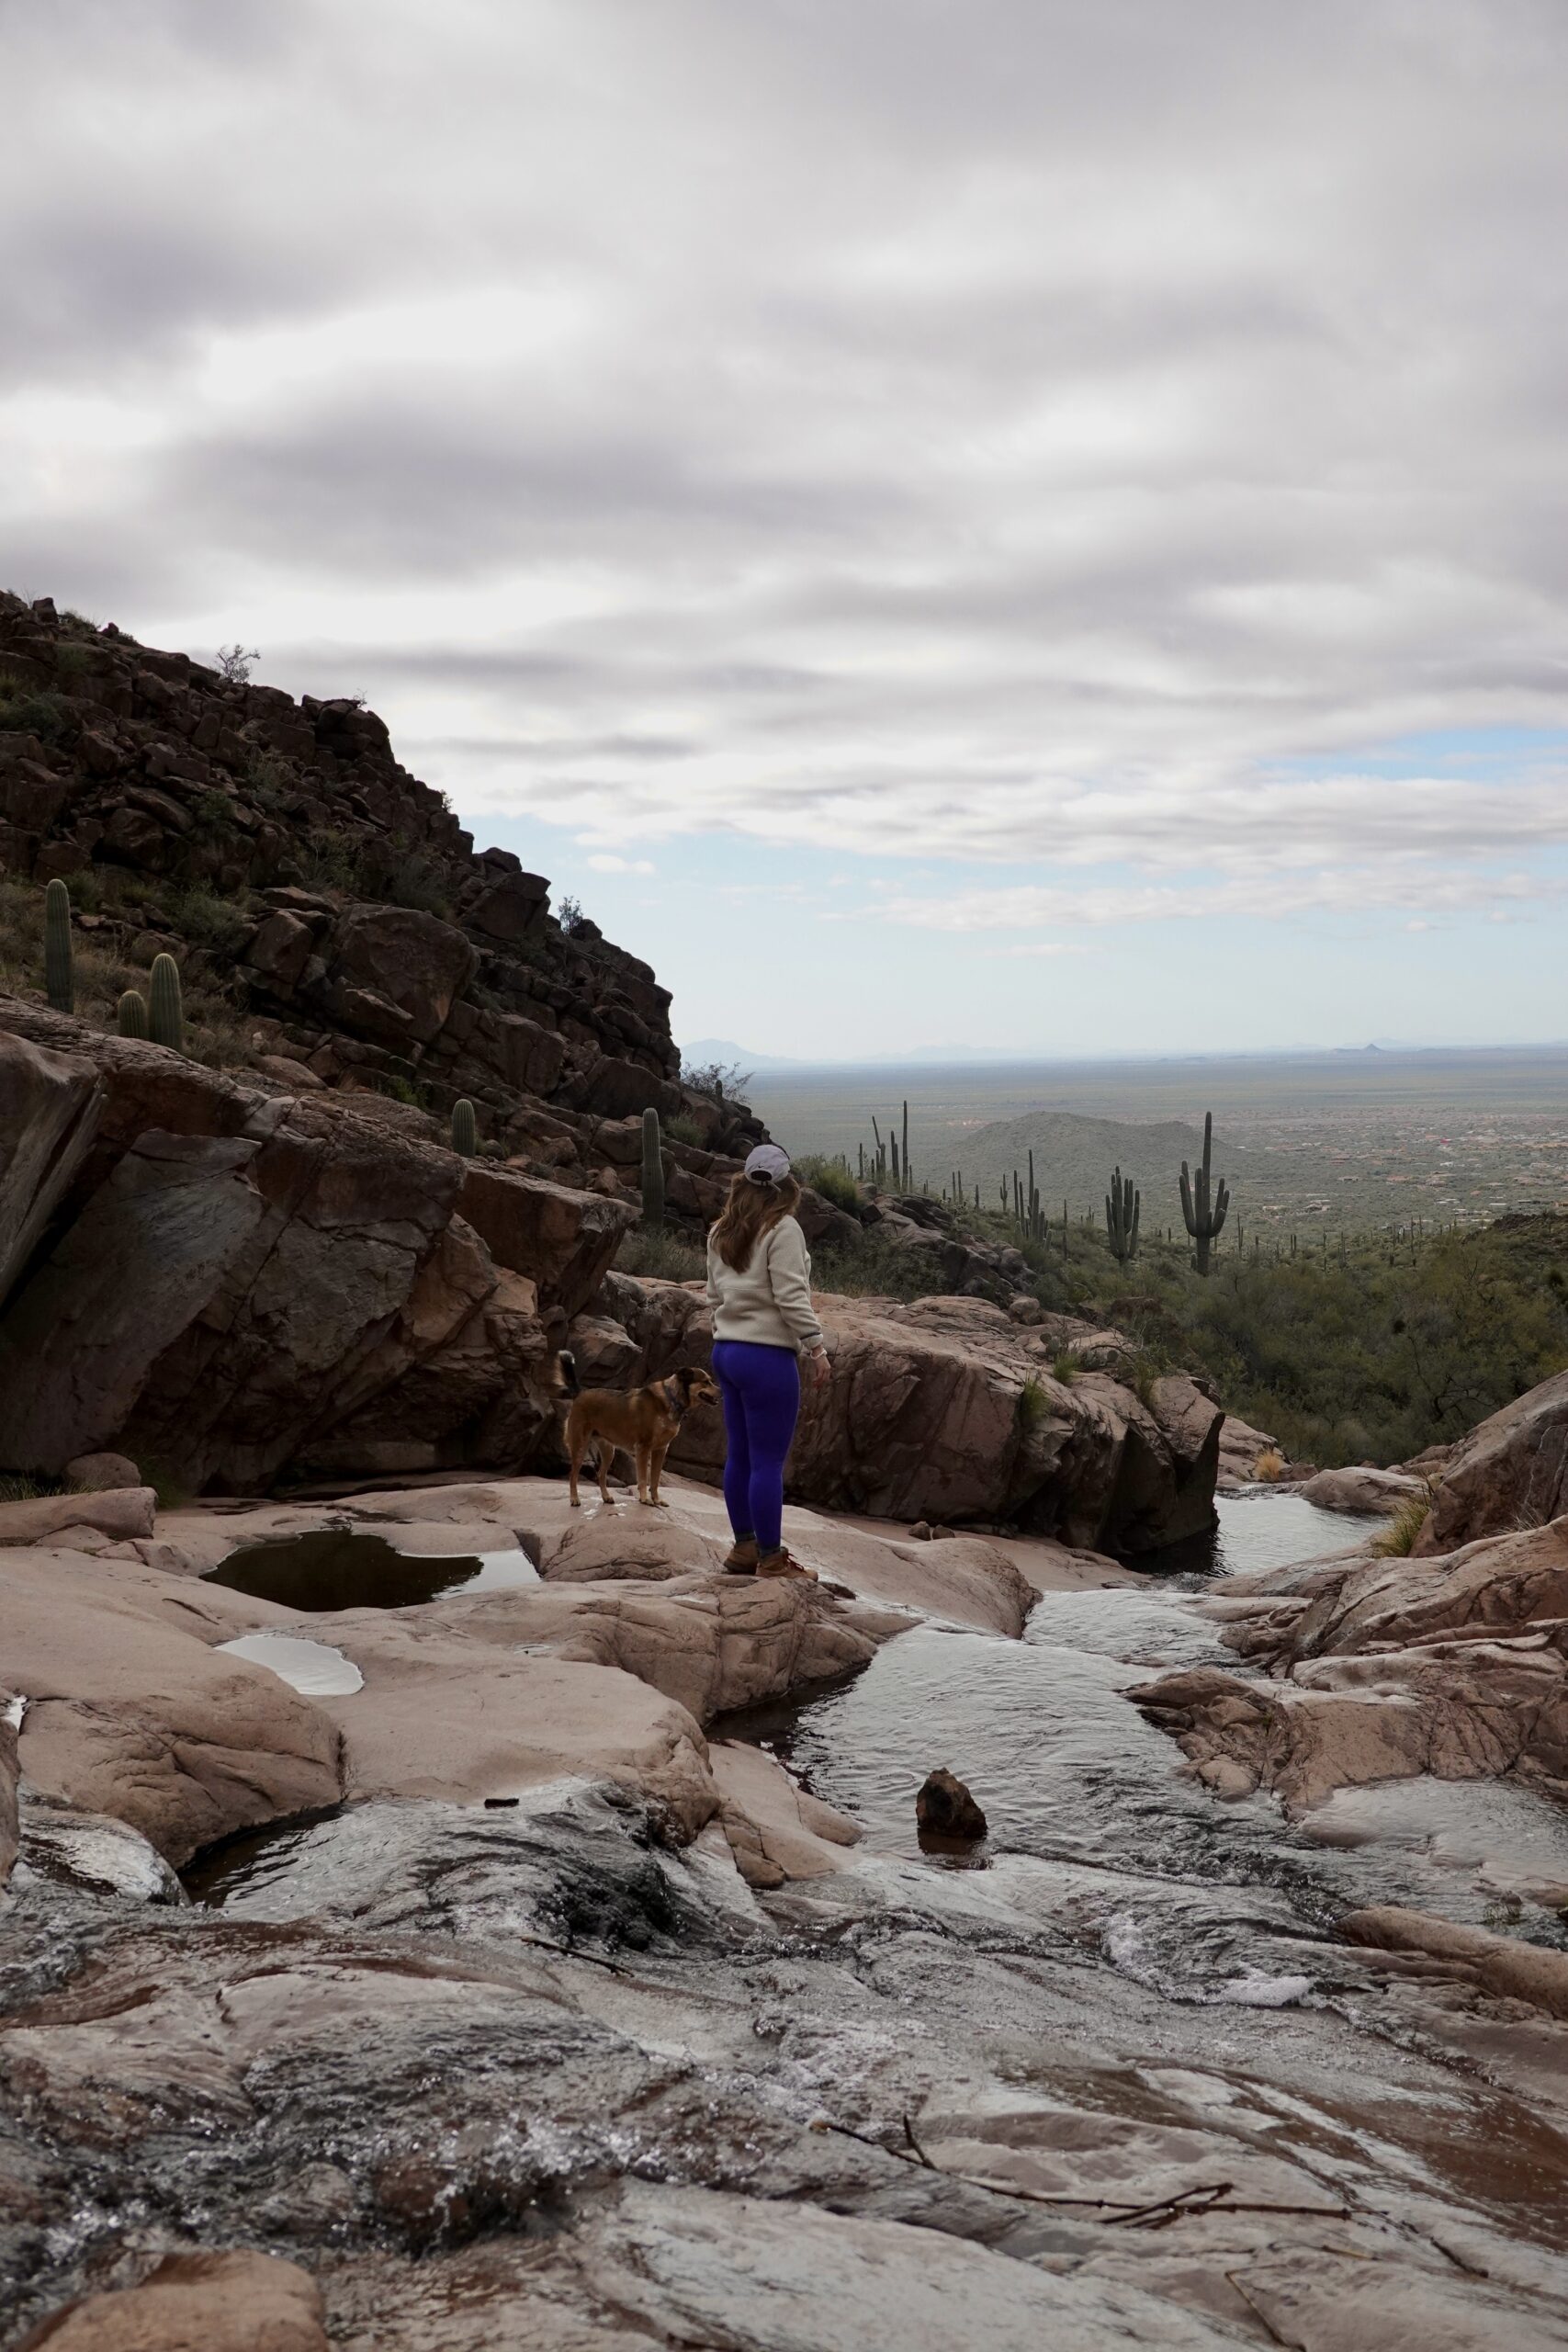 Hieroglyphic Trail- A Great Rainy Hike in the Superstition Mountains